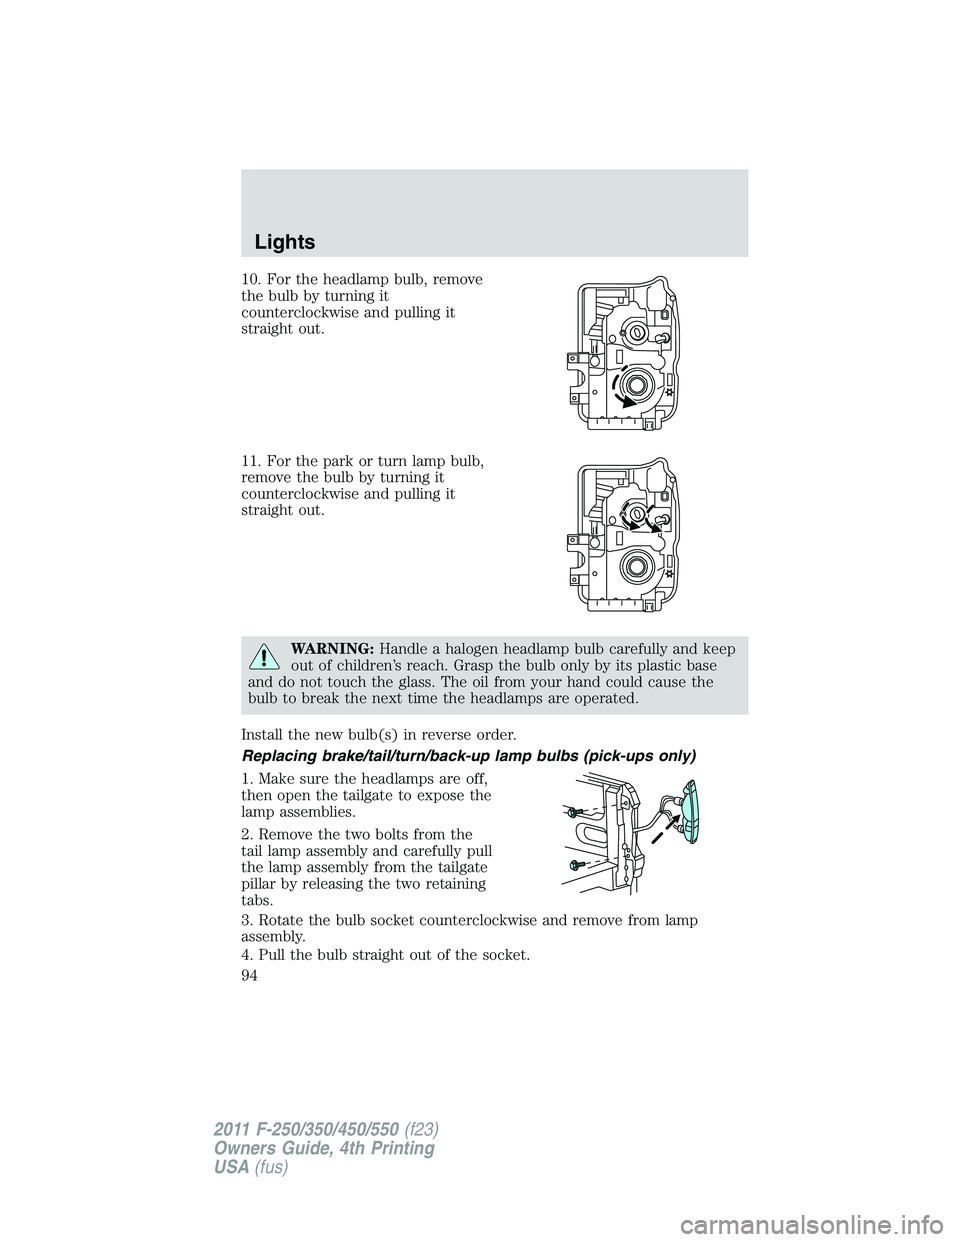 FORD F250 2011  Owners Manual 10. For the headlamp bulb, remove
the bulb by turning it
counterclockwise and pulling it
straight out.
11. For the park or turn lamp bulb,
remove the bulb by turning it
counterclockwise and pulling it